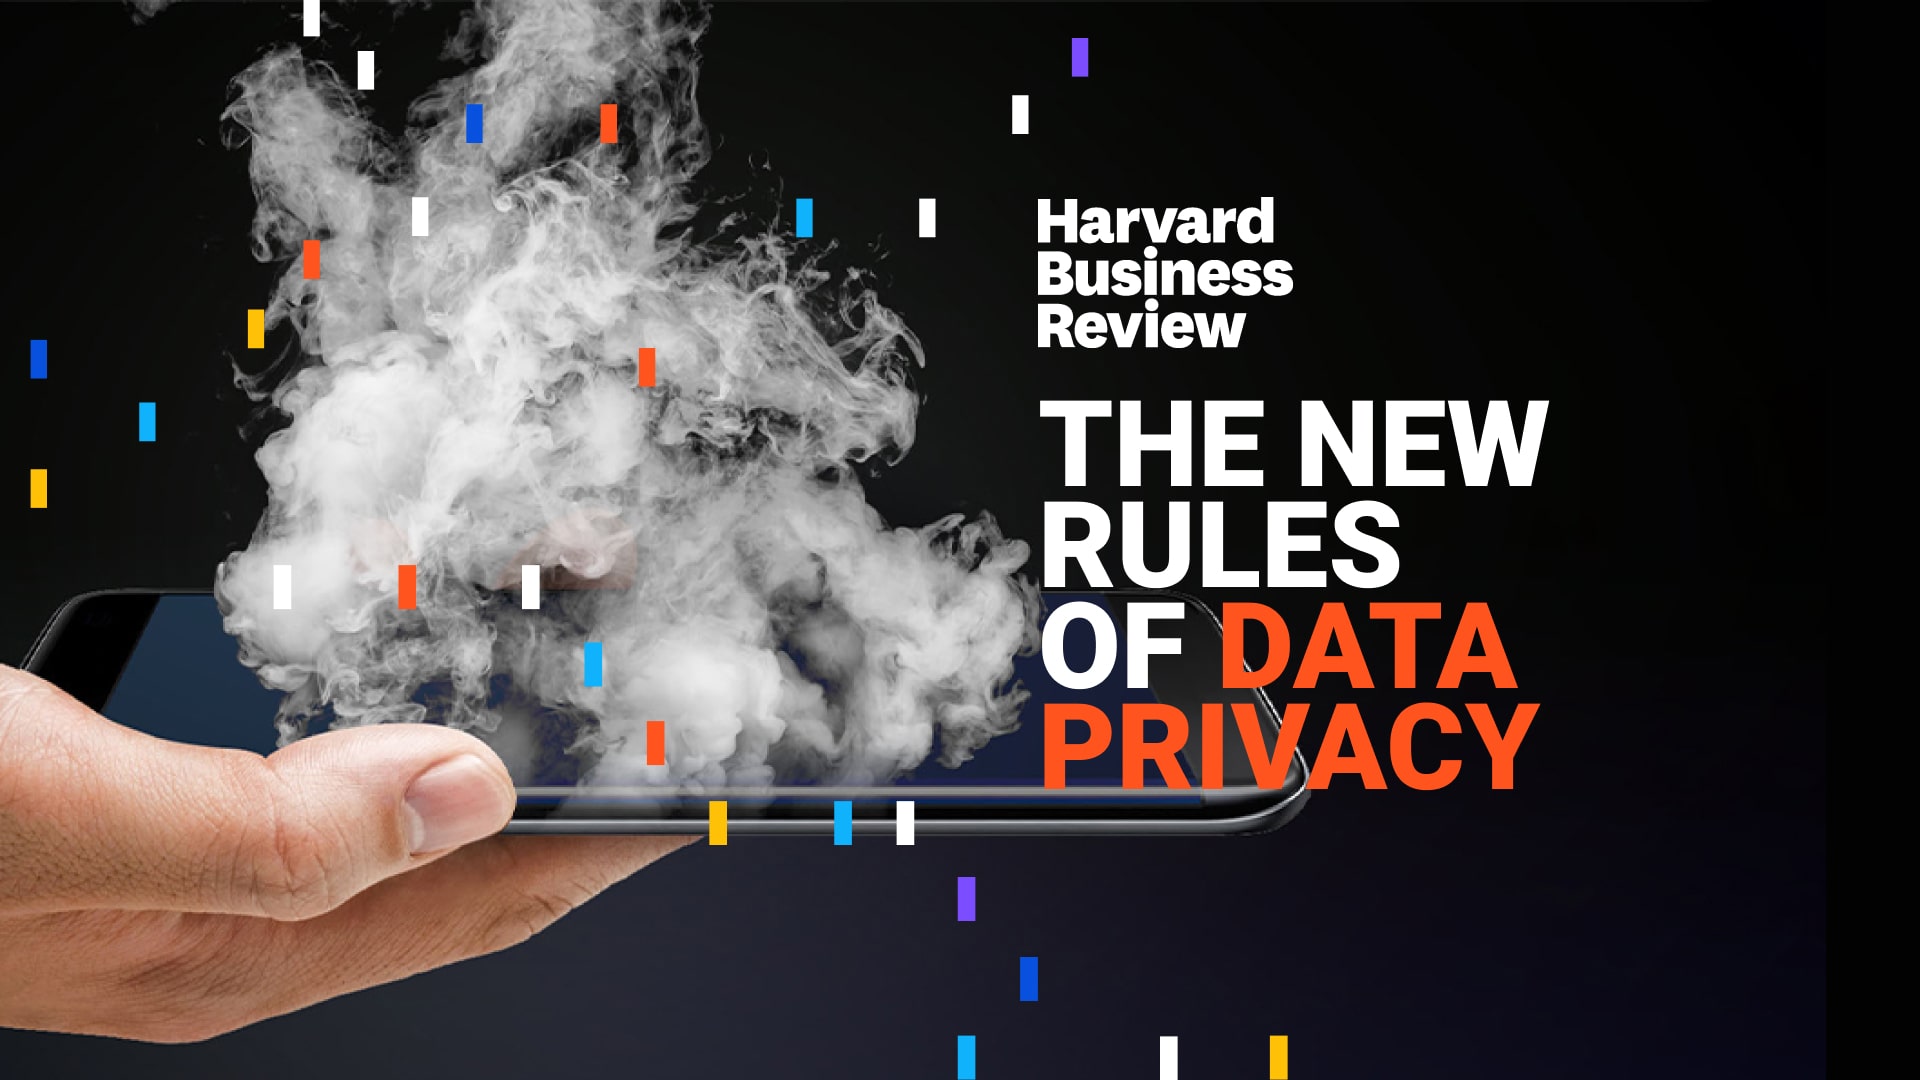 The New Rules of Data Privacy